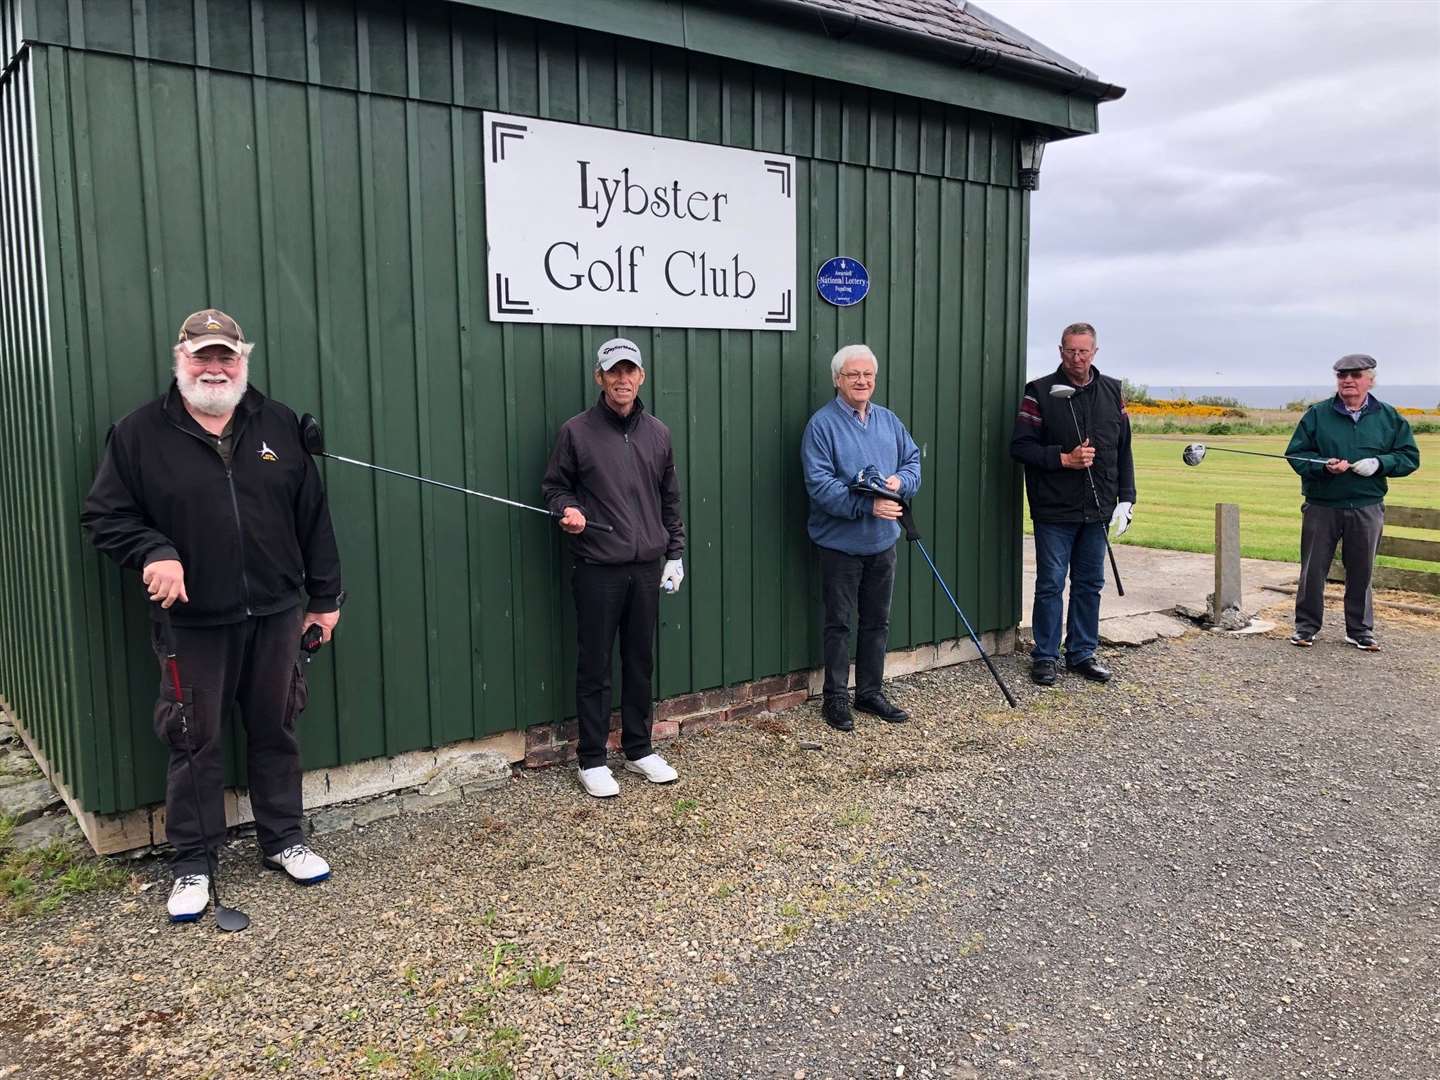 Some of the golfers who took part in the first Stableford competition to be held this season at Lybster Golf Club line up for a socially distanced photo outside the clubhouse. Pictured (from left) are Bill Macintosh, Peter Knapp, James Baillie, Murray Smythe and Mike Browne. Picture: John Gunn